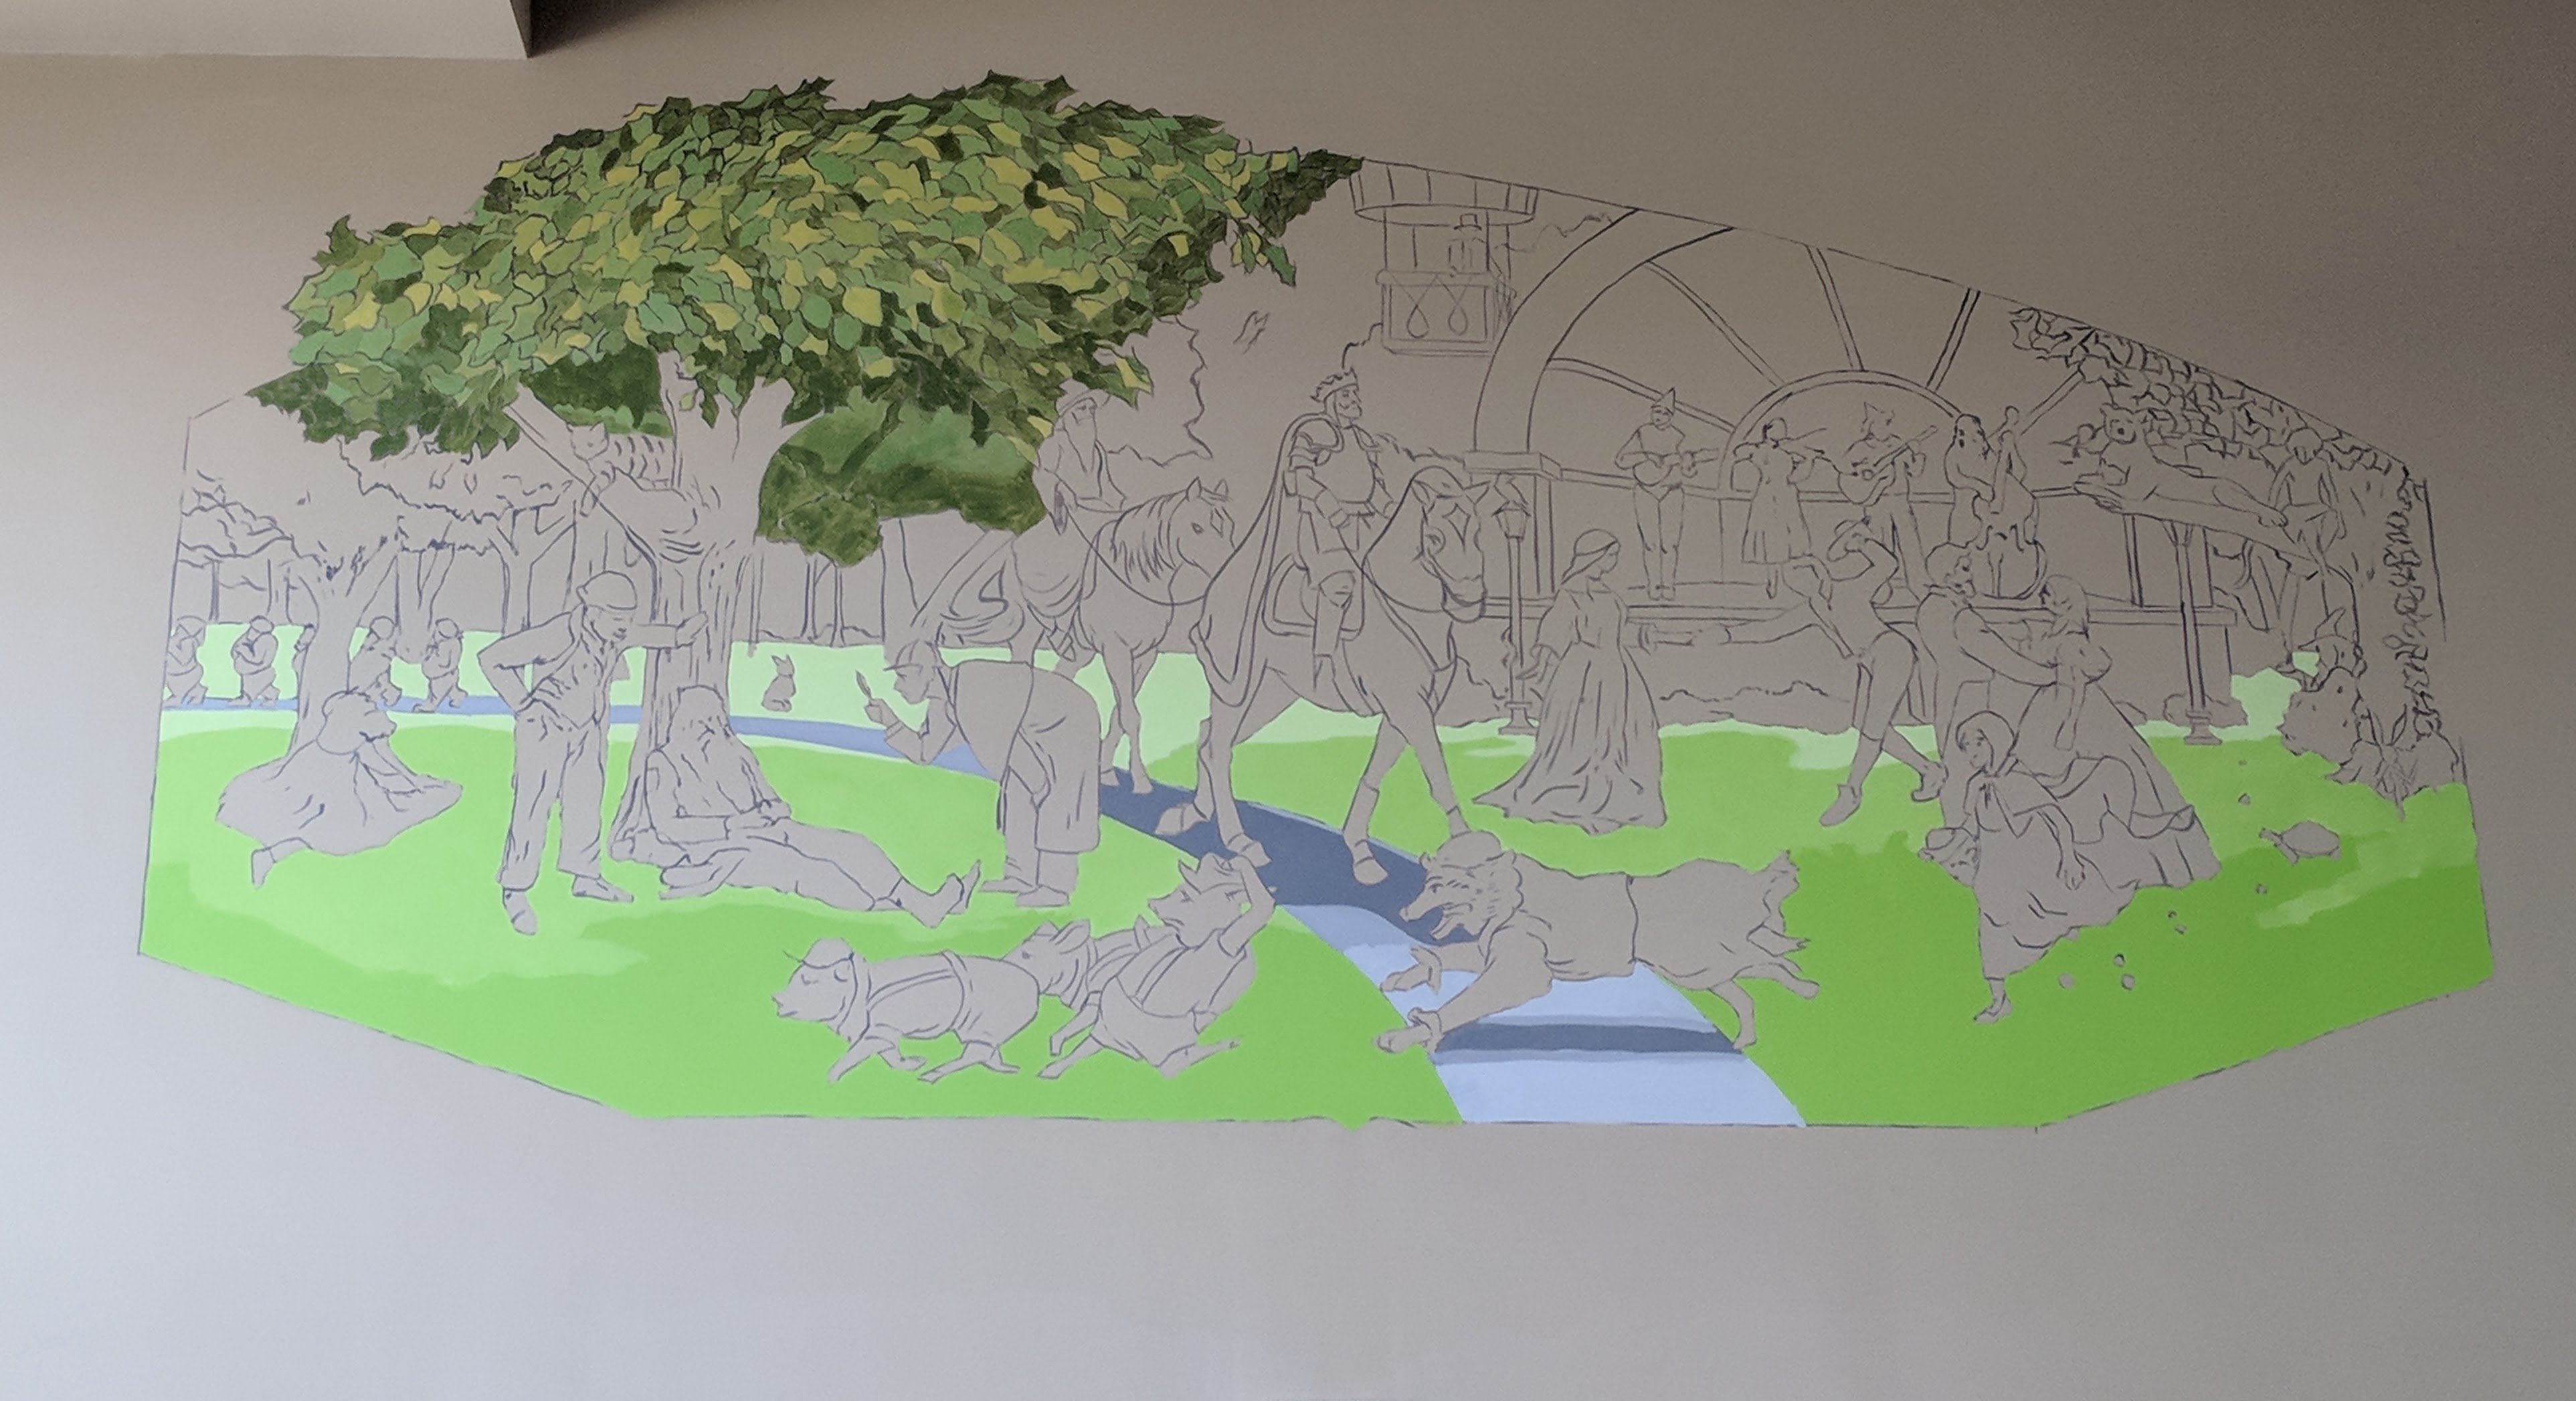 Partially completed mural with tree, grass, and sidewalk elements painted